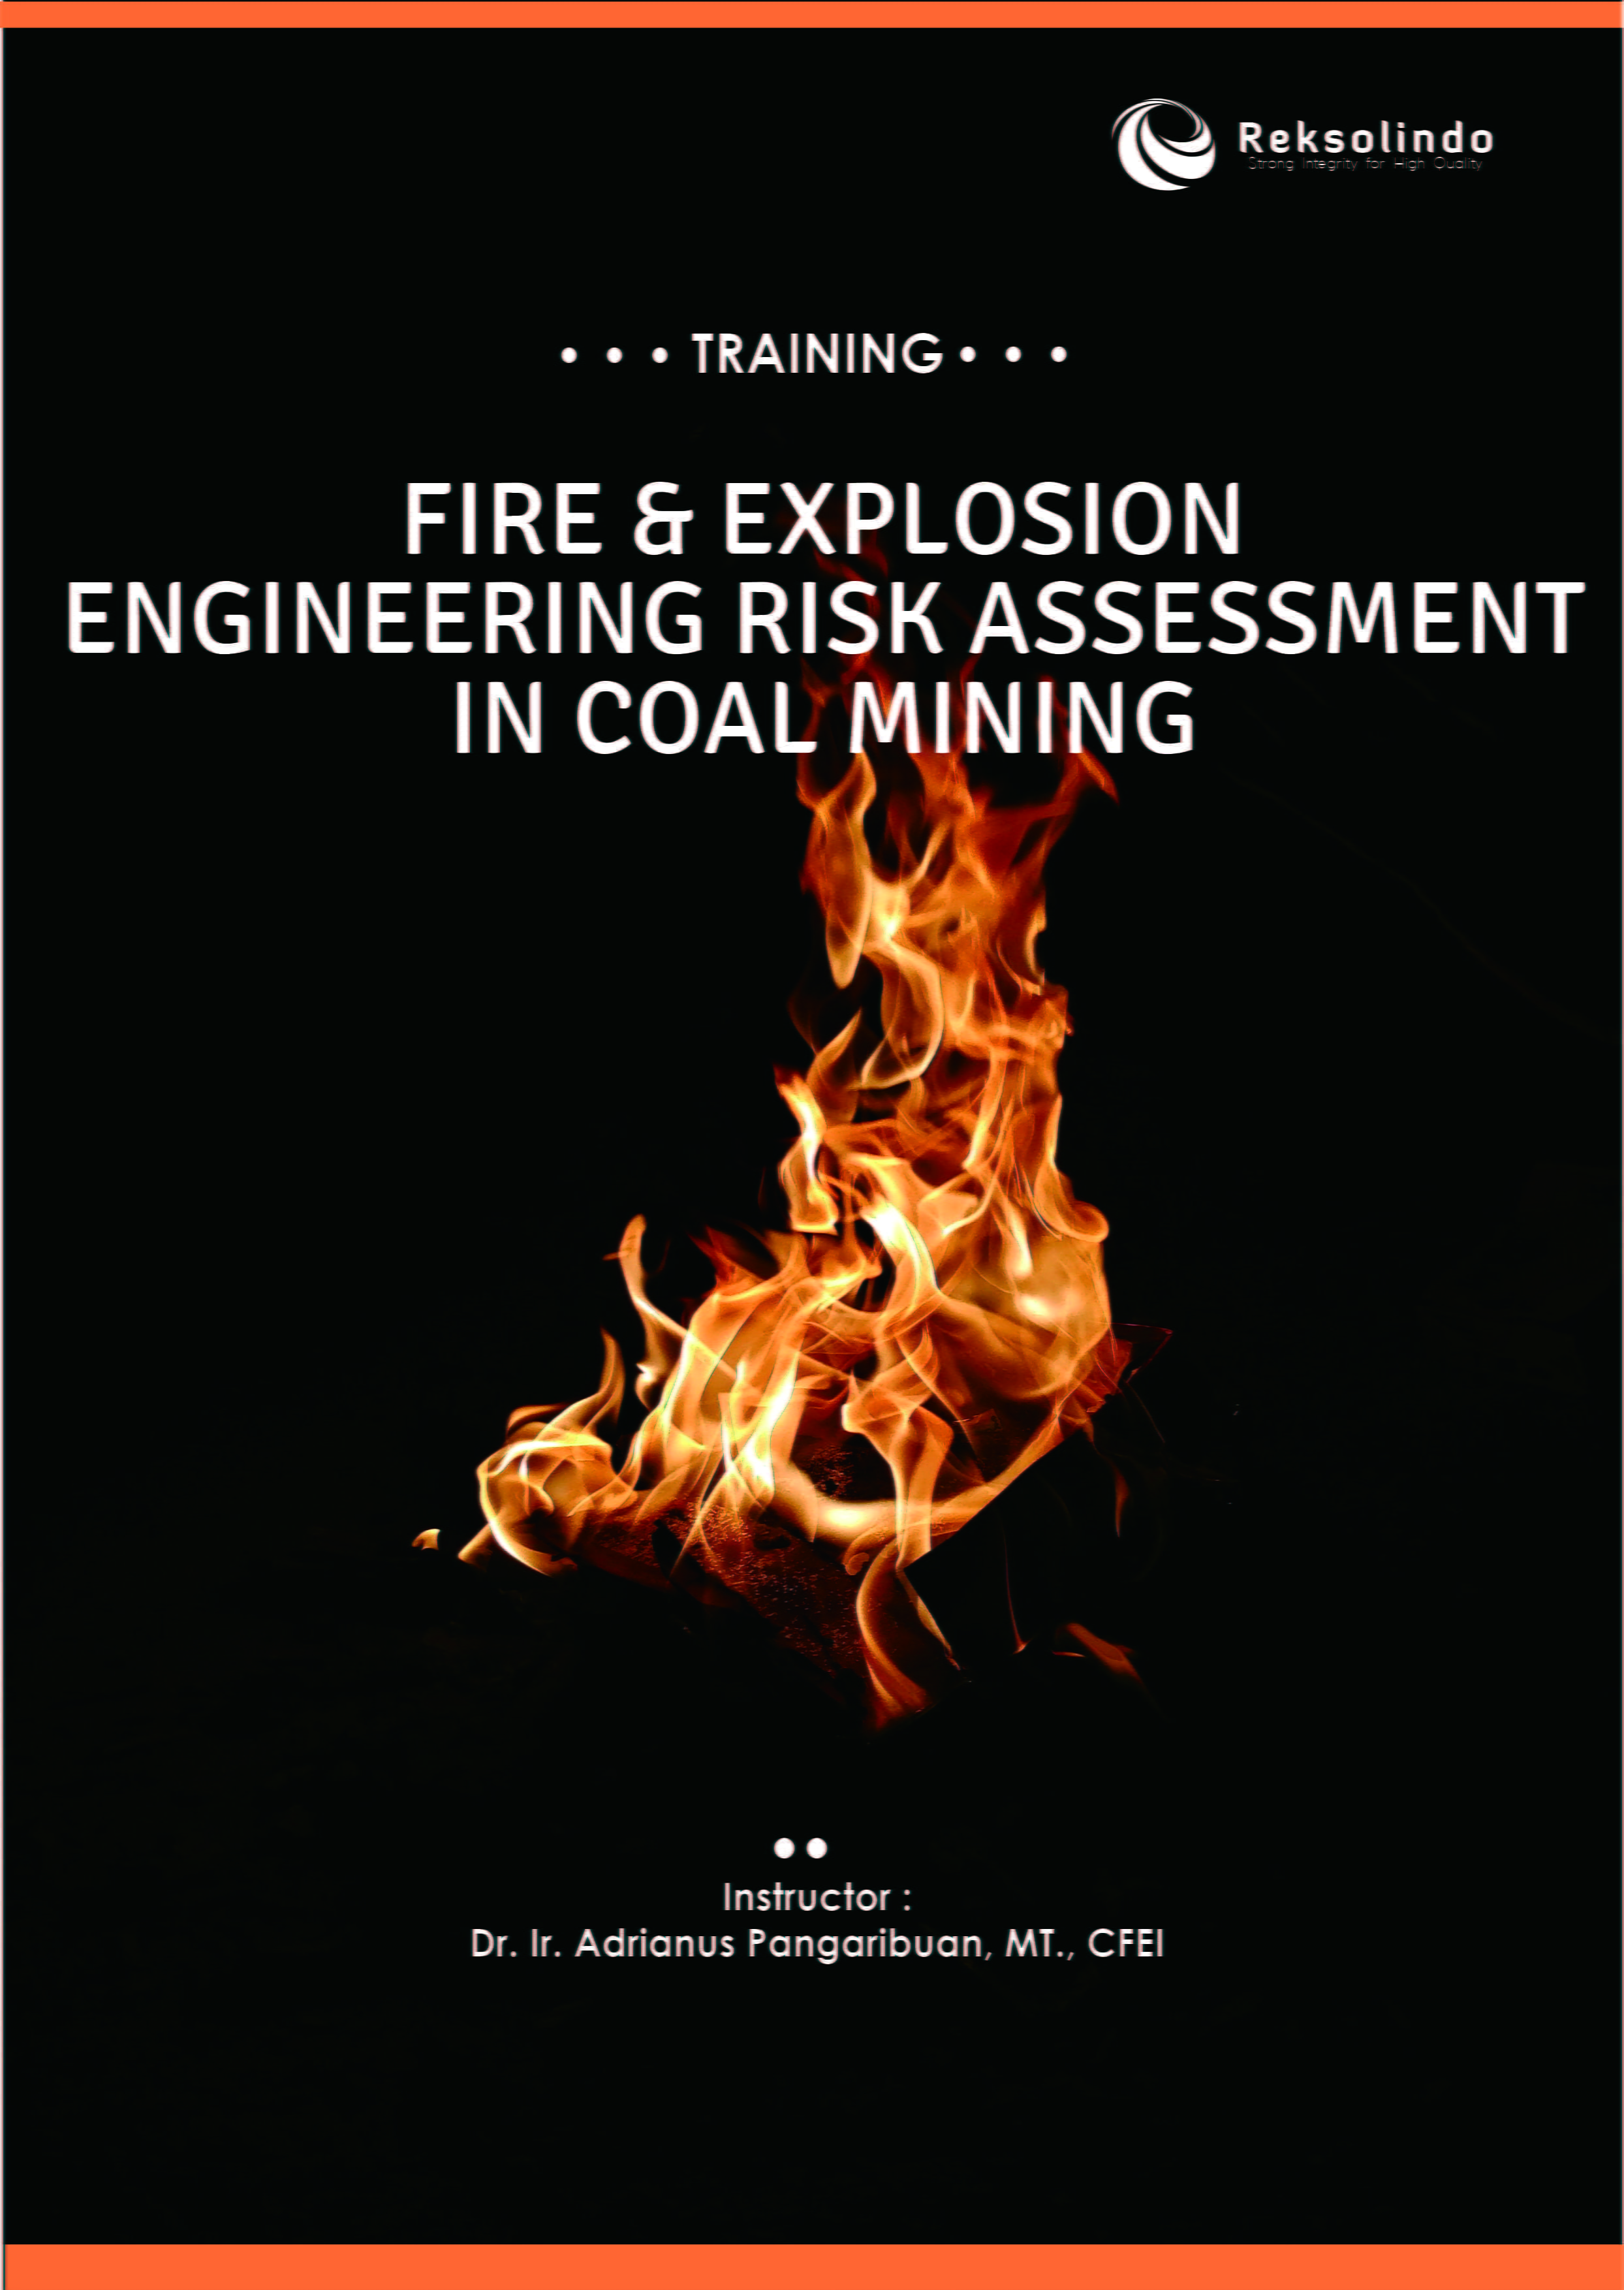 Public Training: Fire & Explosion Engineering Risk Assessment in Coal Mining